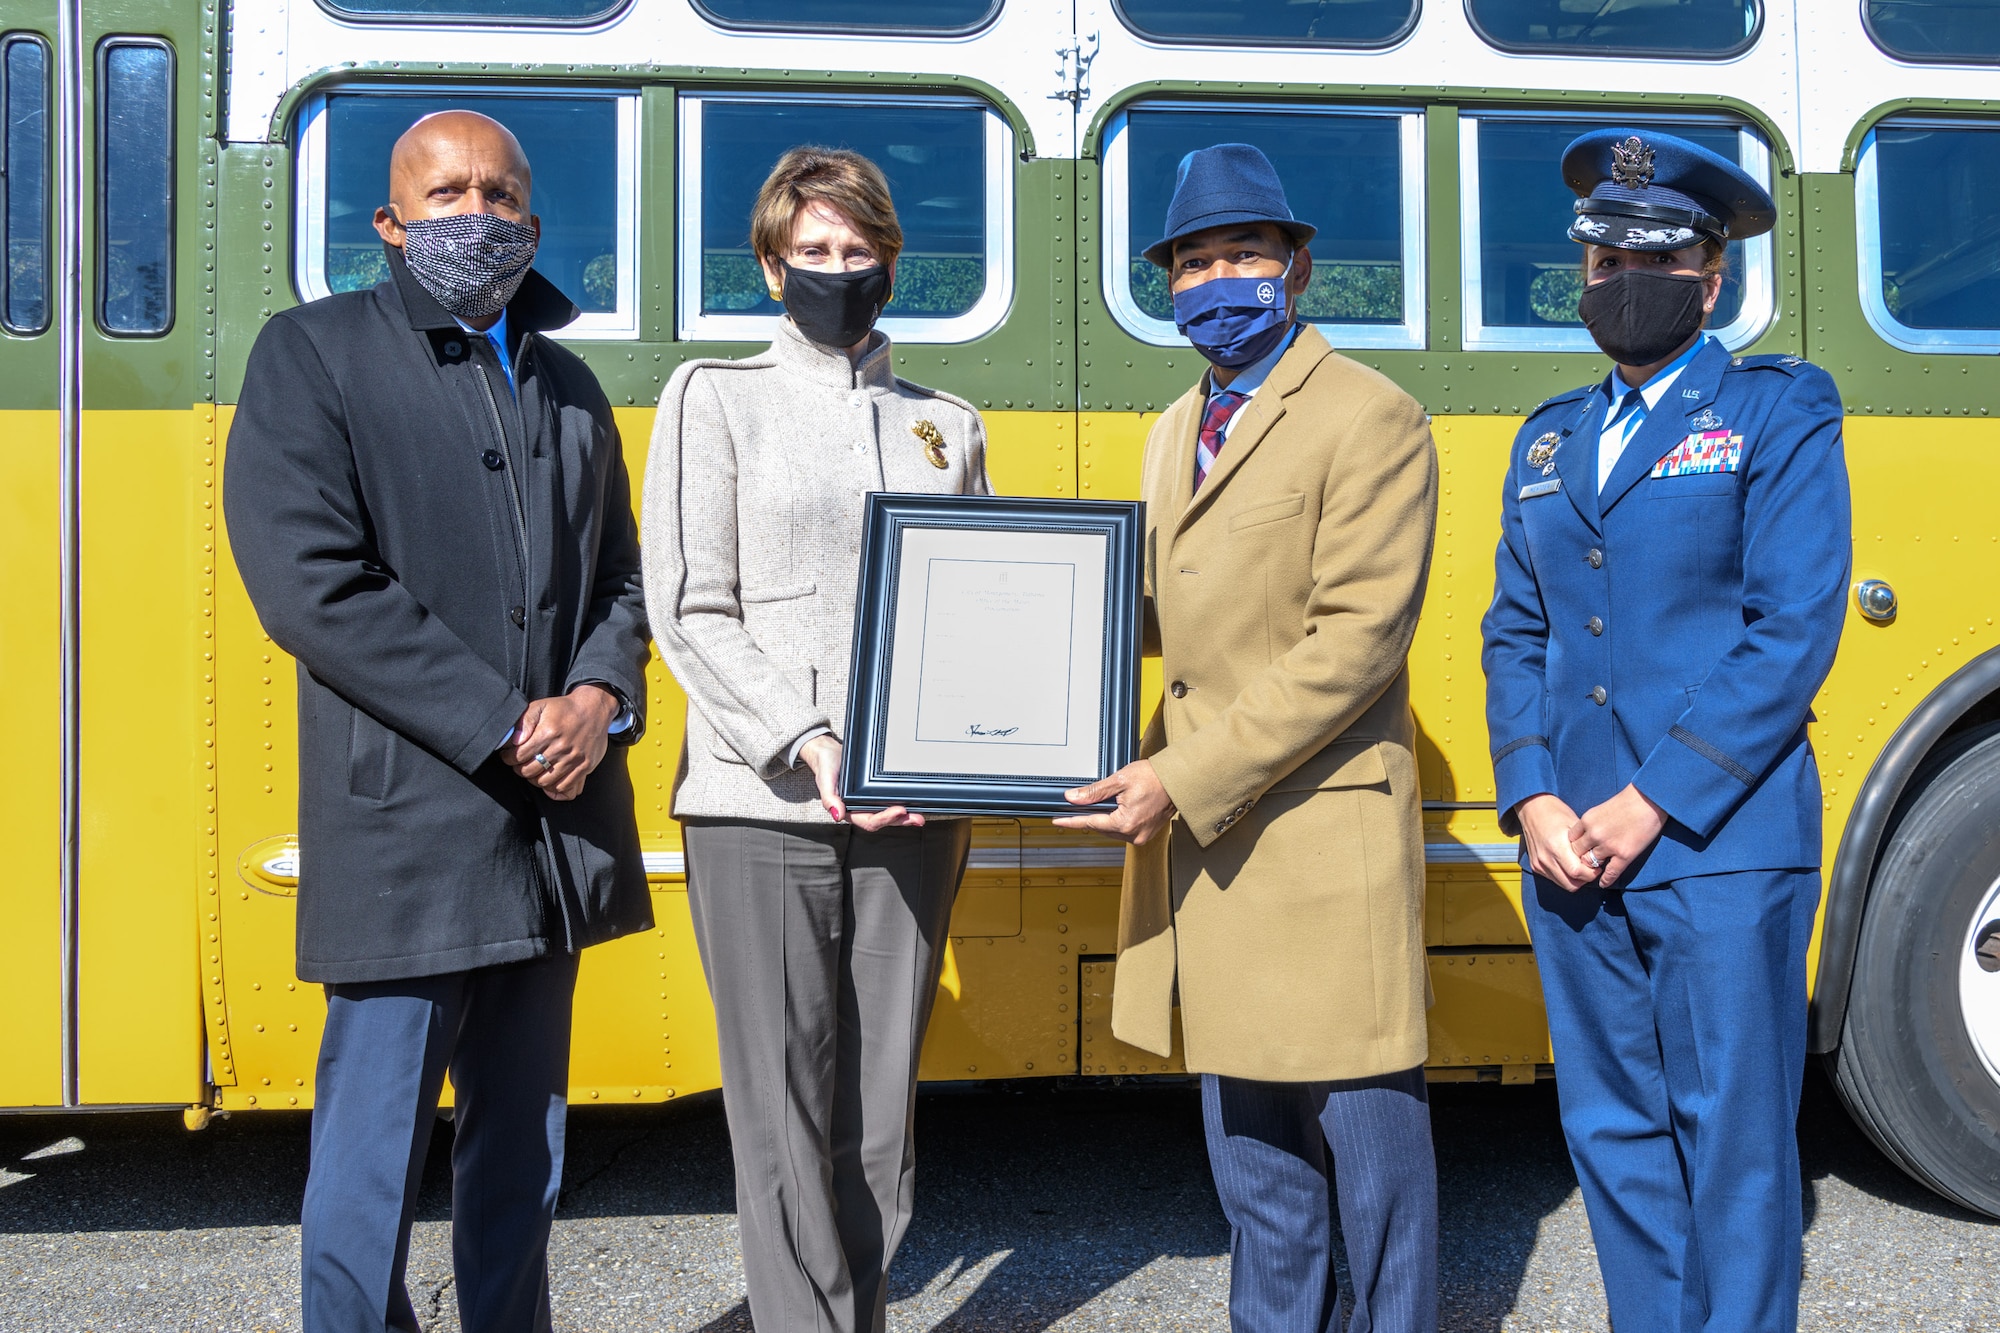 Bryan Stevenson, Equal Justice Initiative director (left), Secretary of the Air Force Barbara Barrett, Mayor of Montgomery Steven Reed and Col. Eries Mentzer, 42nd Air Base Wing commander, pose for a photo on Maxwell Air Force Base, Alabama, Dec. 1, 2020, the 65th anniversary of her arrest for refusing to give up her seat on a Montgomery bus. The event marks the start of a 382-day partnership between Maxwell and the city of Montgomery. The partnership’s aim is to focus on diversity and inclusion so everyone can “rise to their best,” said Mentzer. To make this possible, she formed the Freedom to Serve Initiative, a team of Airmen whose goal is to identify and find solutions to obstacles that may impede Airmen’s success. (U.S. Air Force photo by Trey Ward)